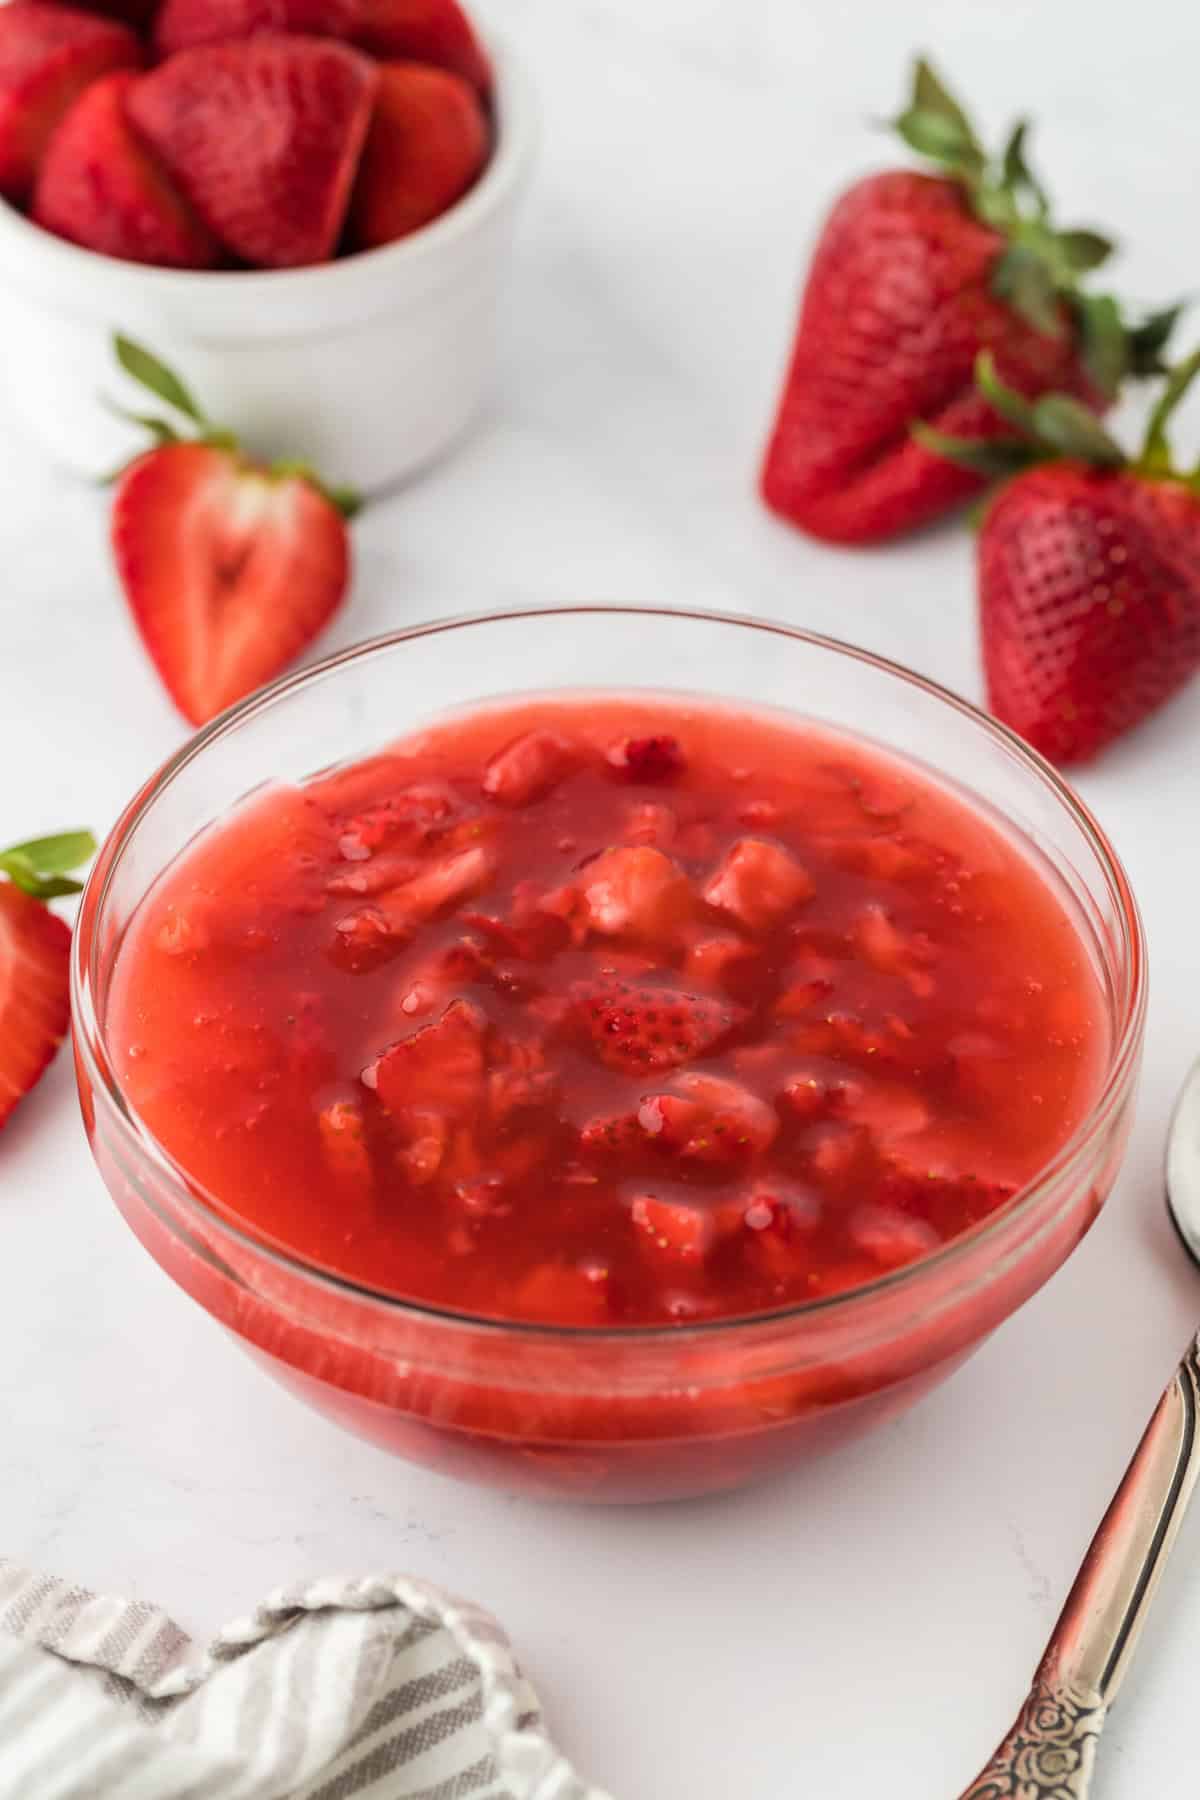 Strawberry sauce in a clear glass bowl with a spoon by it. The bowl is surrounded by whole and halved fresh strawberries on a wooden surface. In the background, there's a white white bowl with more strawberries